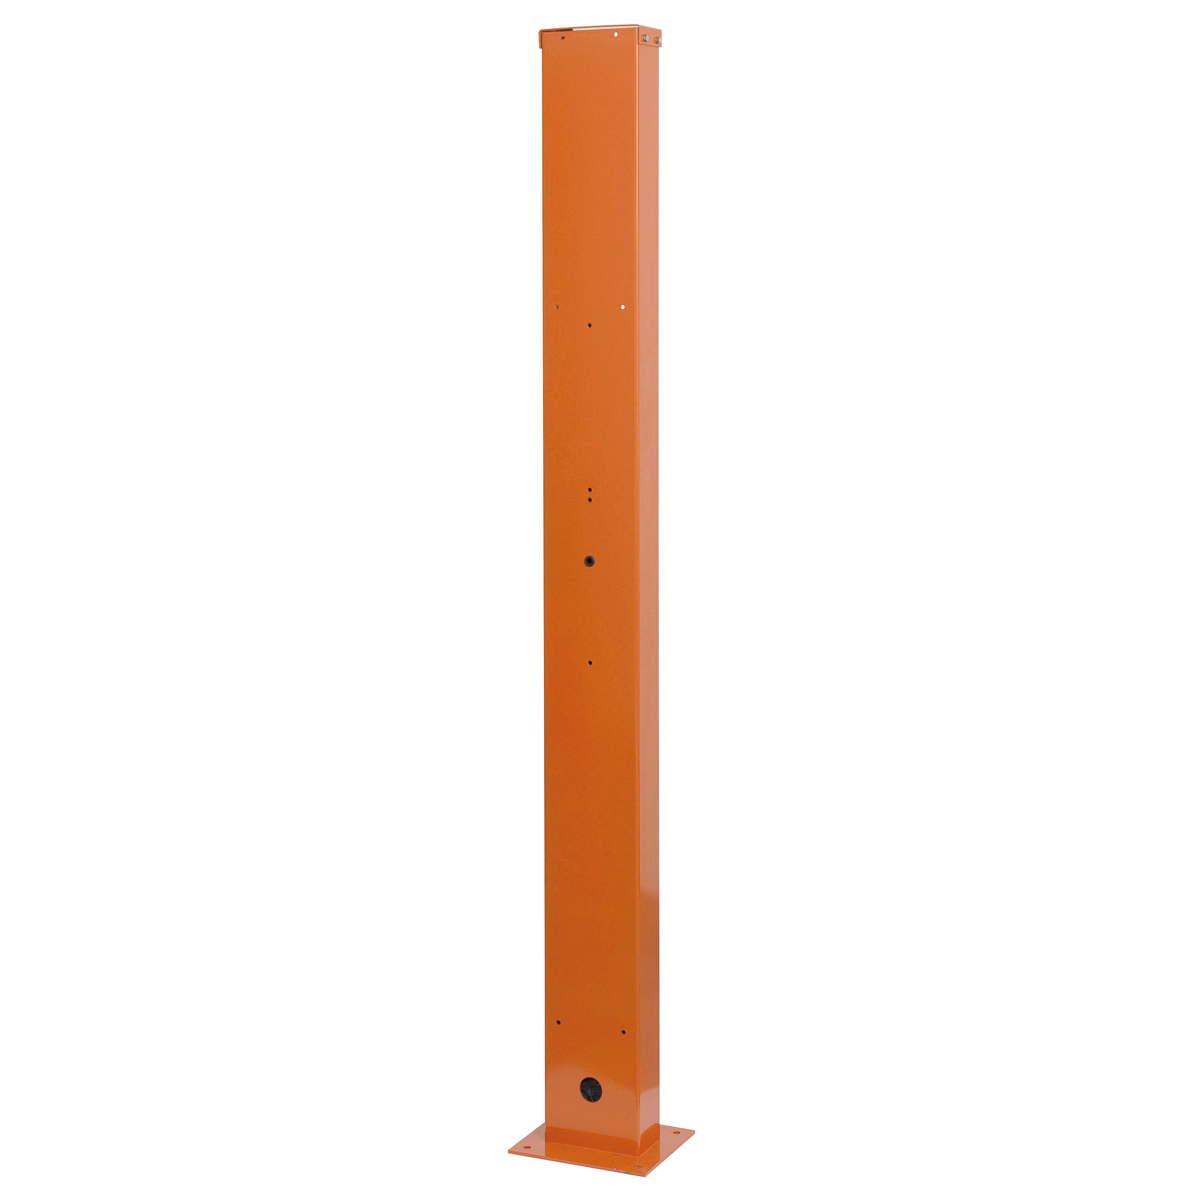 Free-standing Mounting Post for INDUSTRONIC intercom stations of the DA(E(/DX€ 0x5 series